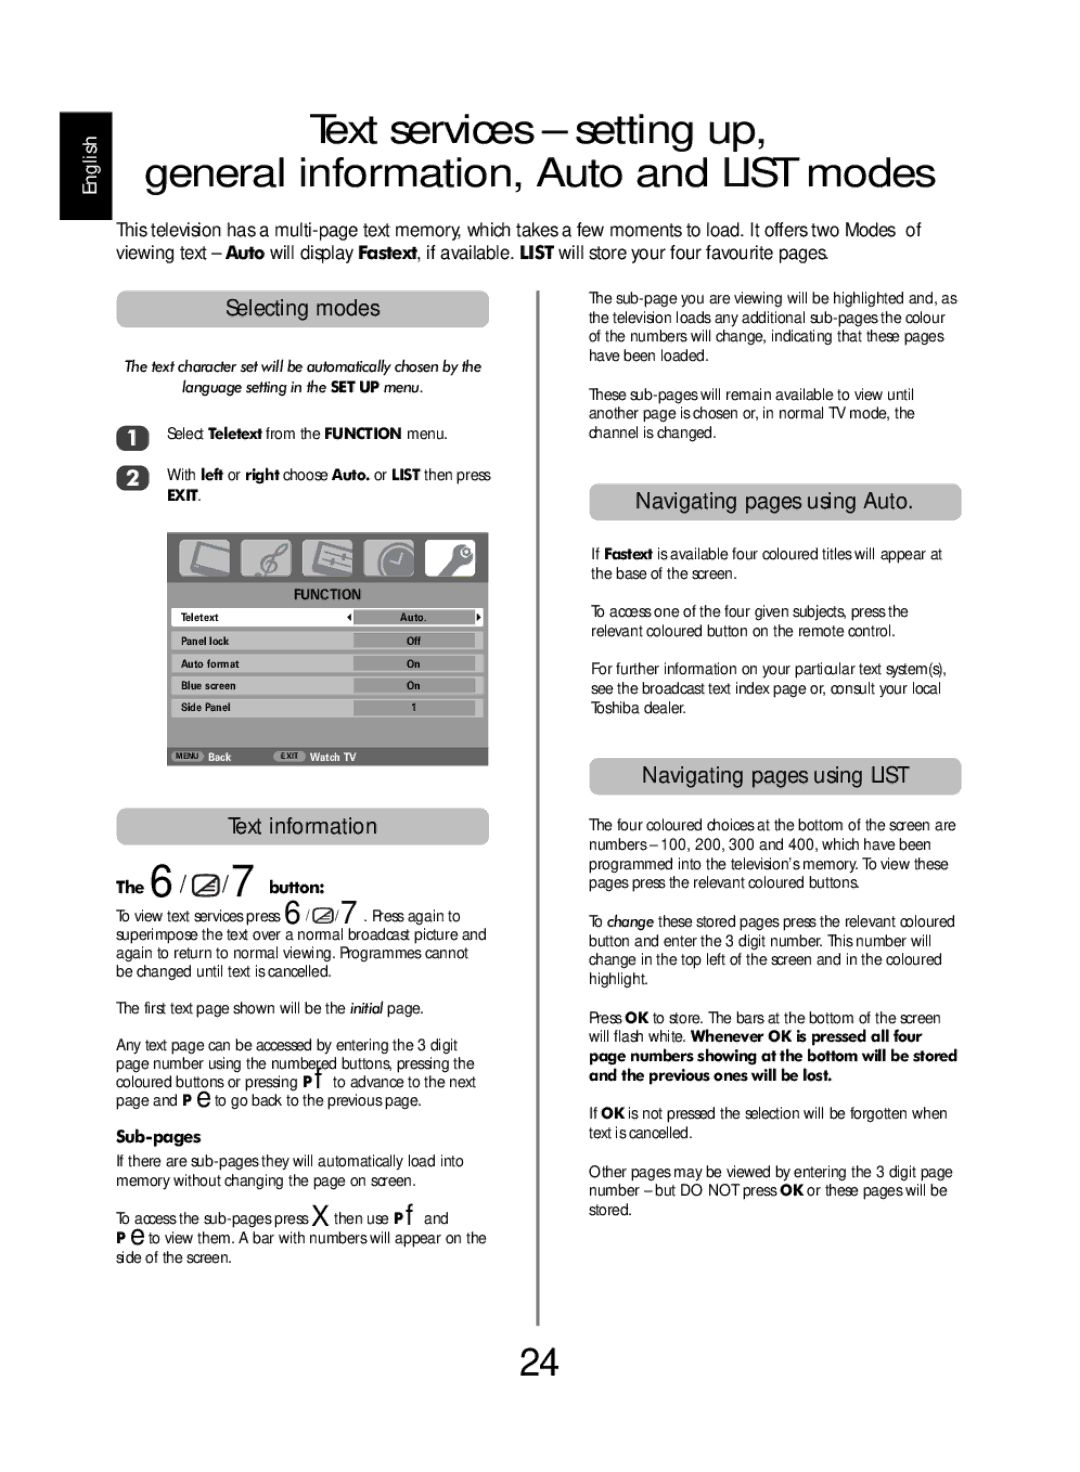 SRS Labs WL66 owner manual Selecting modes, Text information, Navigating pages using Auto, Navigating pages using List 